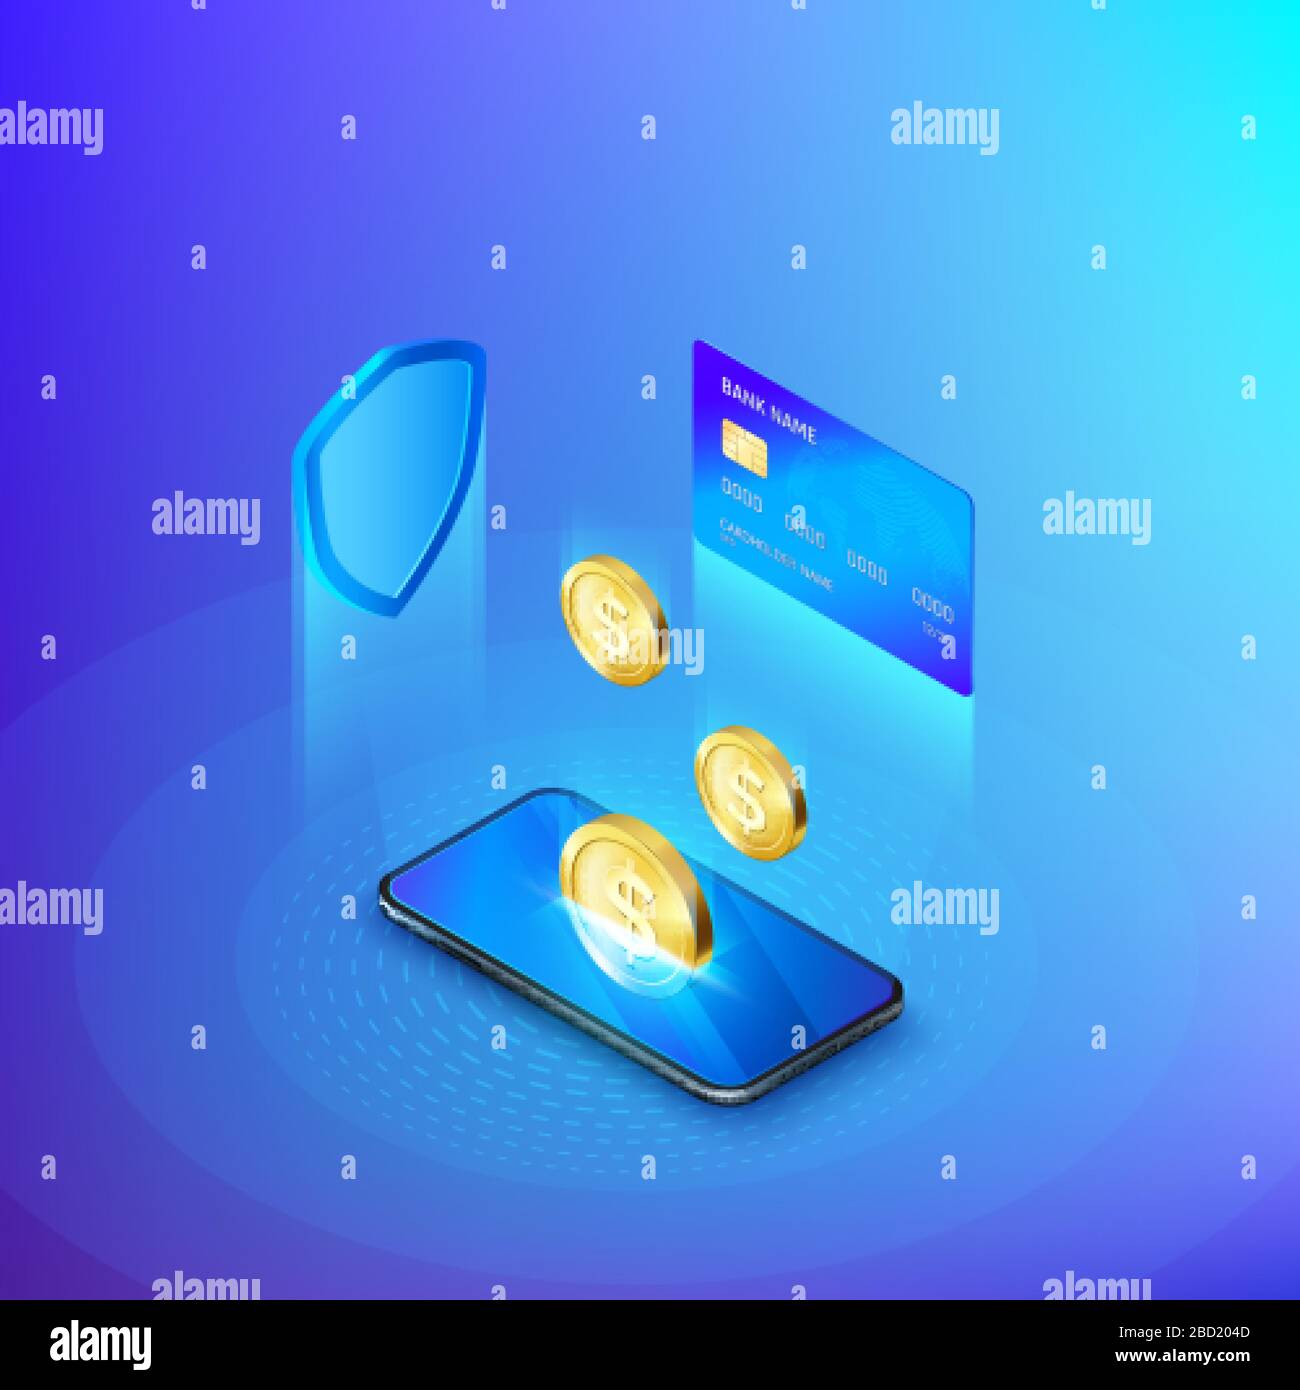 Mobile phone and falling gold coin credit card and shield concept of banking online or deposit money isometric banner. Security of banking account or Stock Vector